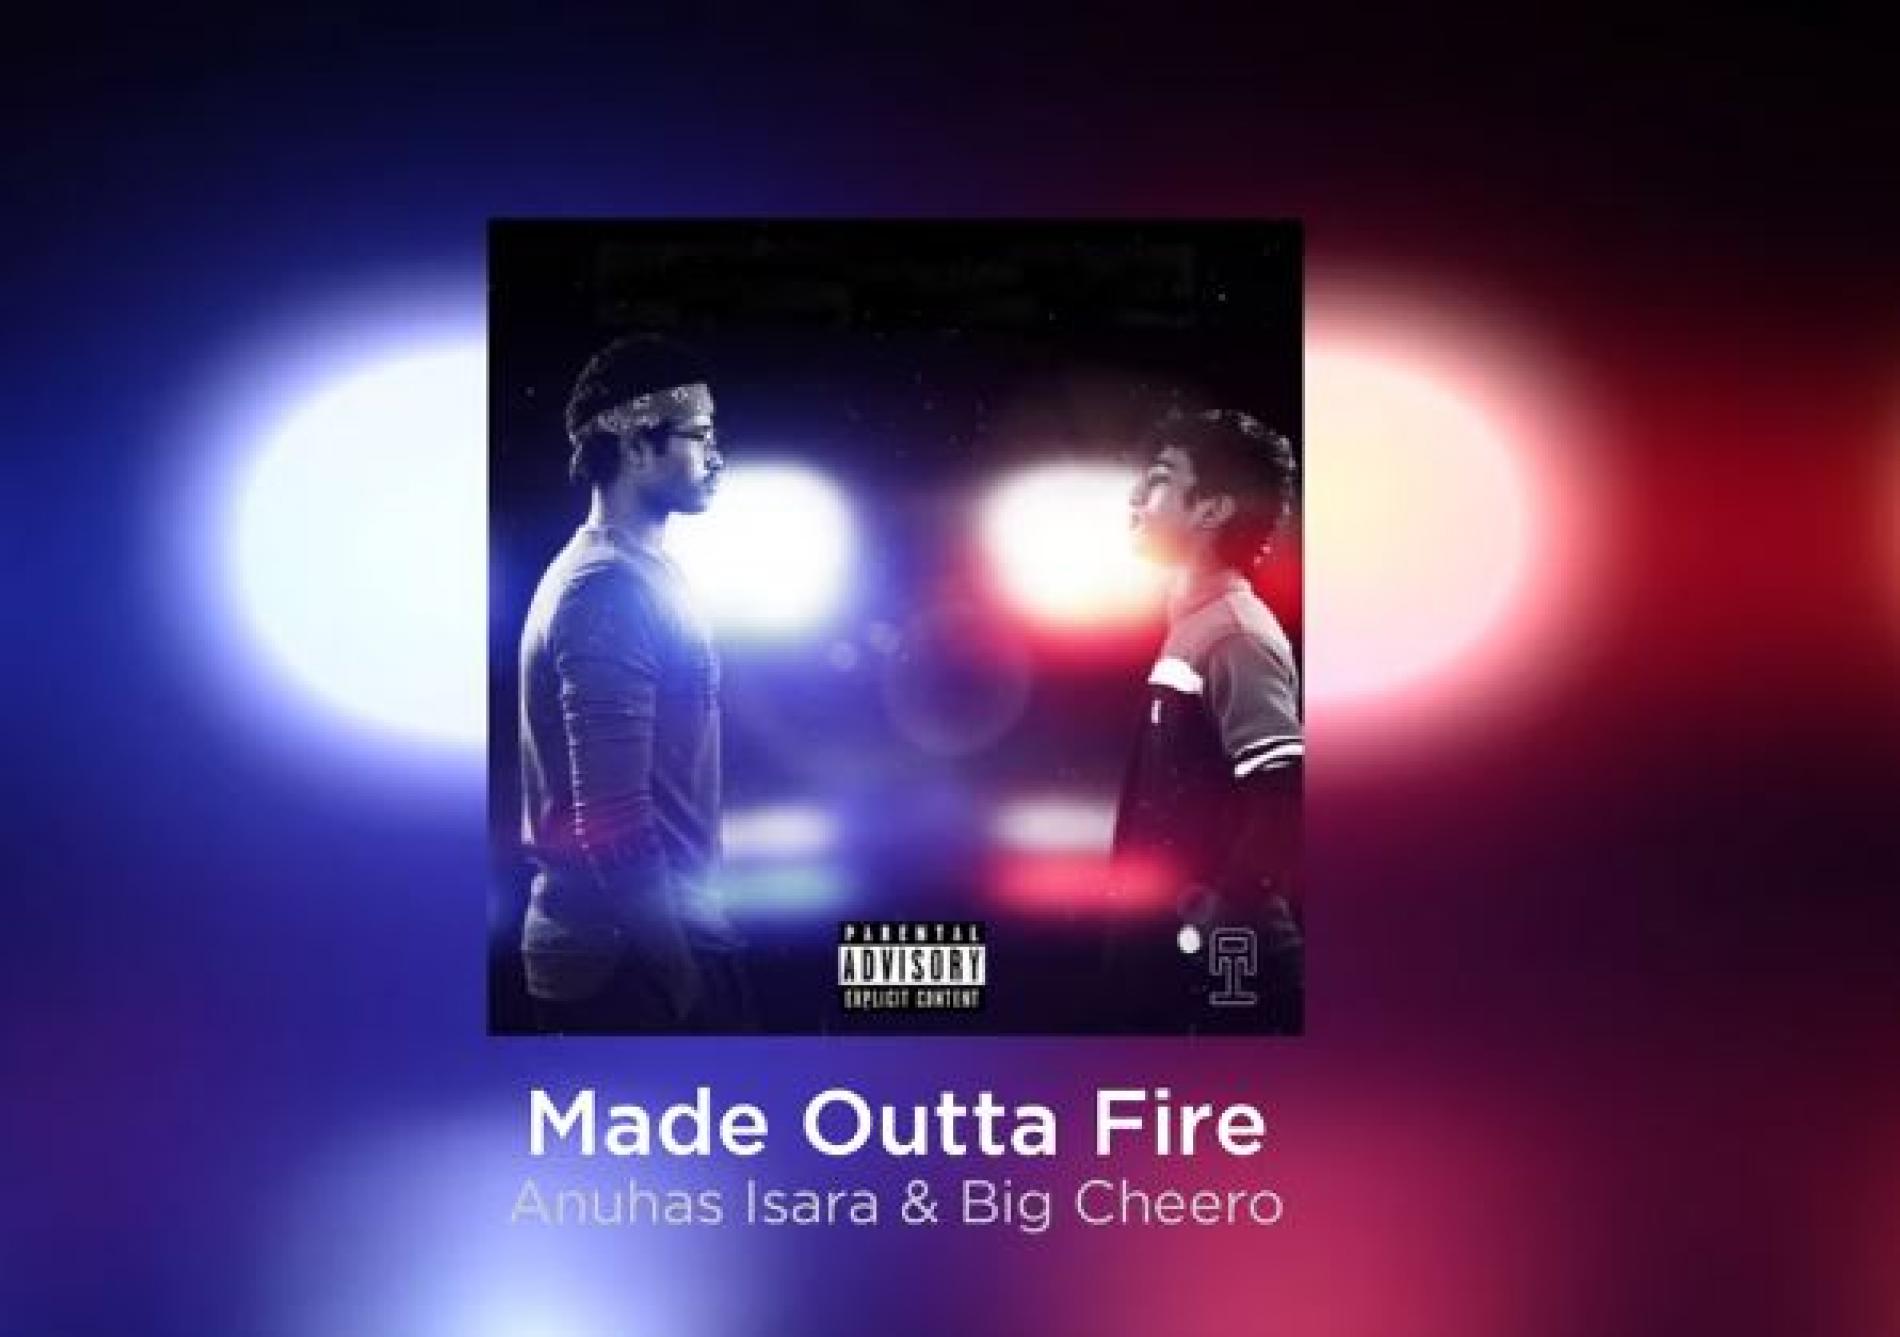 New Music : Made Outta Fire – Anuhas Isara & Big Cheero [Explicit Version]